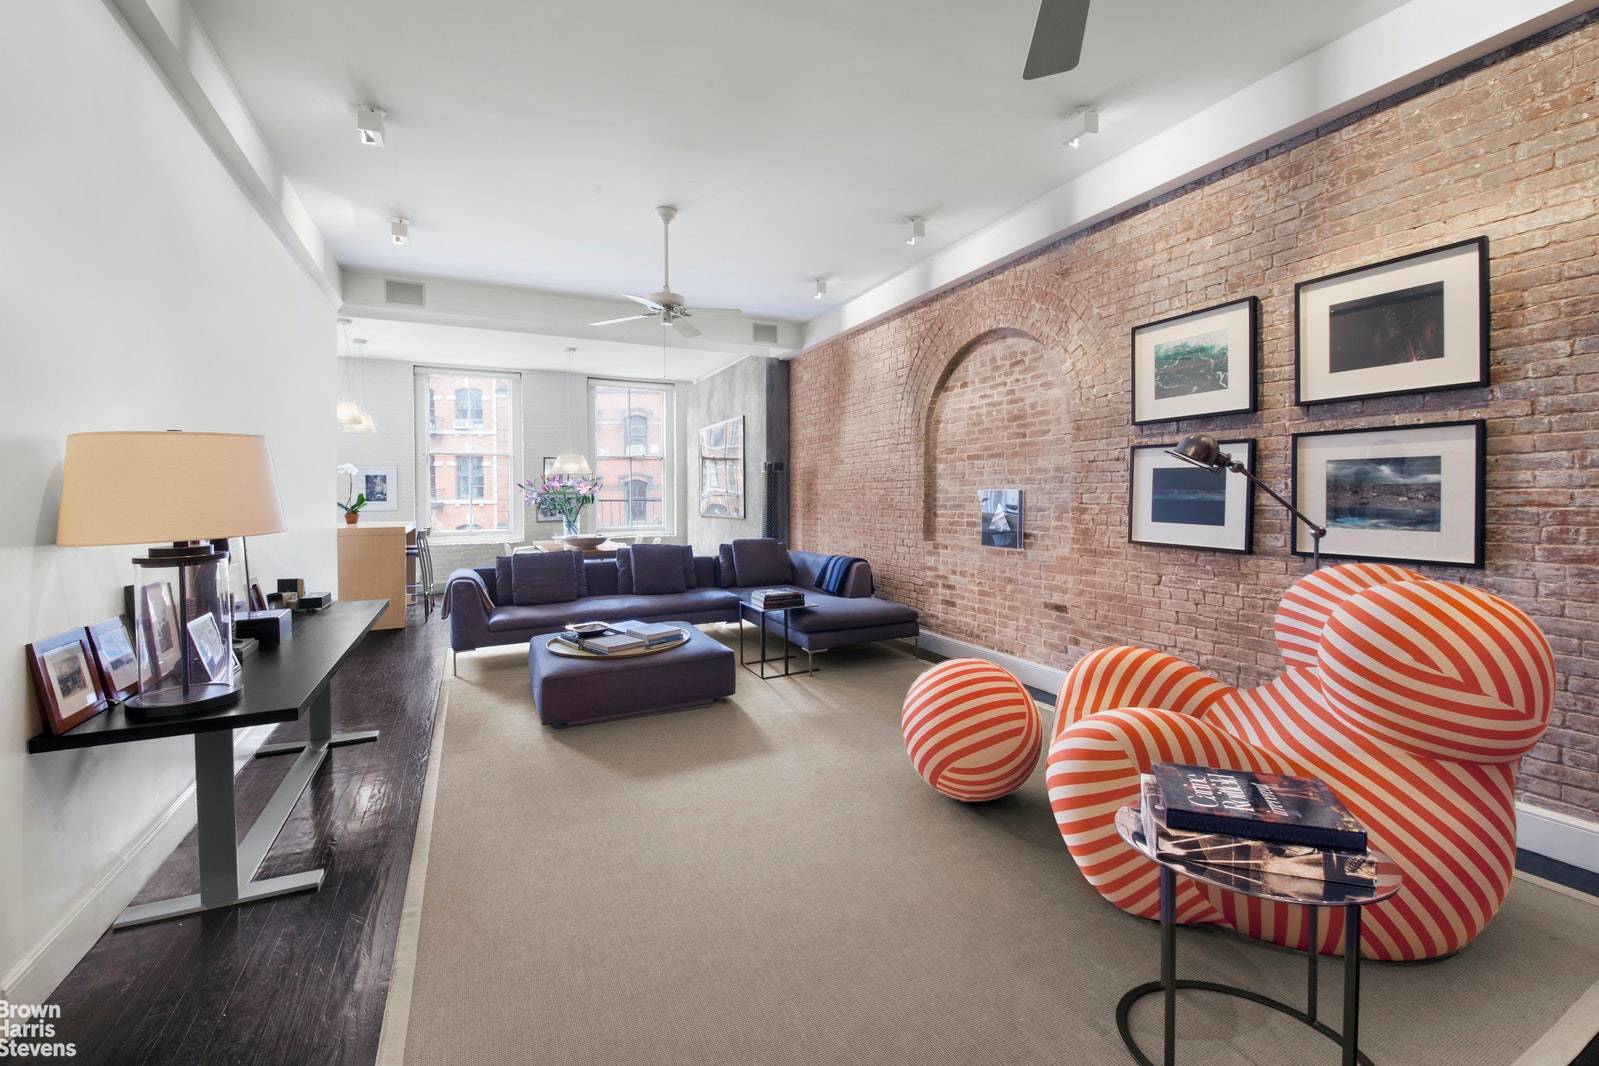 This rare and classic full floor loft is located on Tribeca's most sought after block and captures the true spirit and essence of the neighborhood.